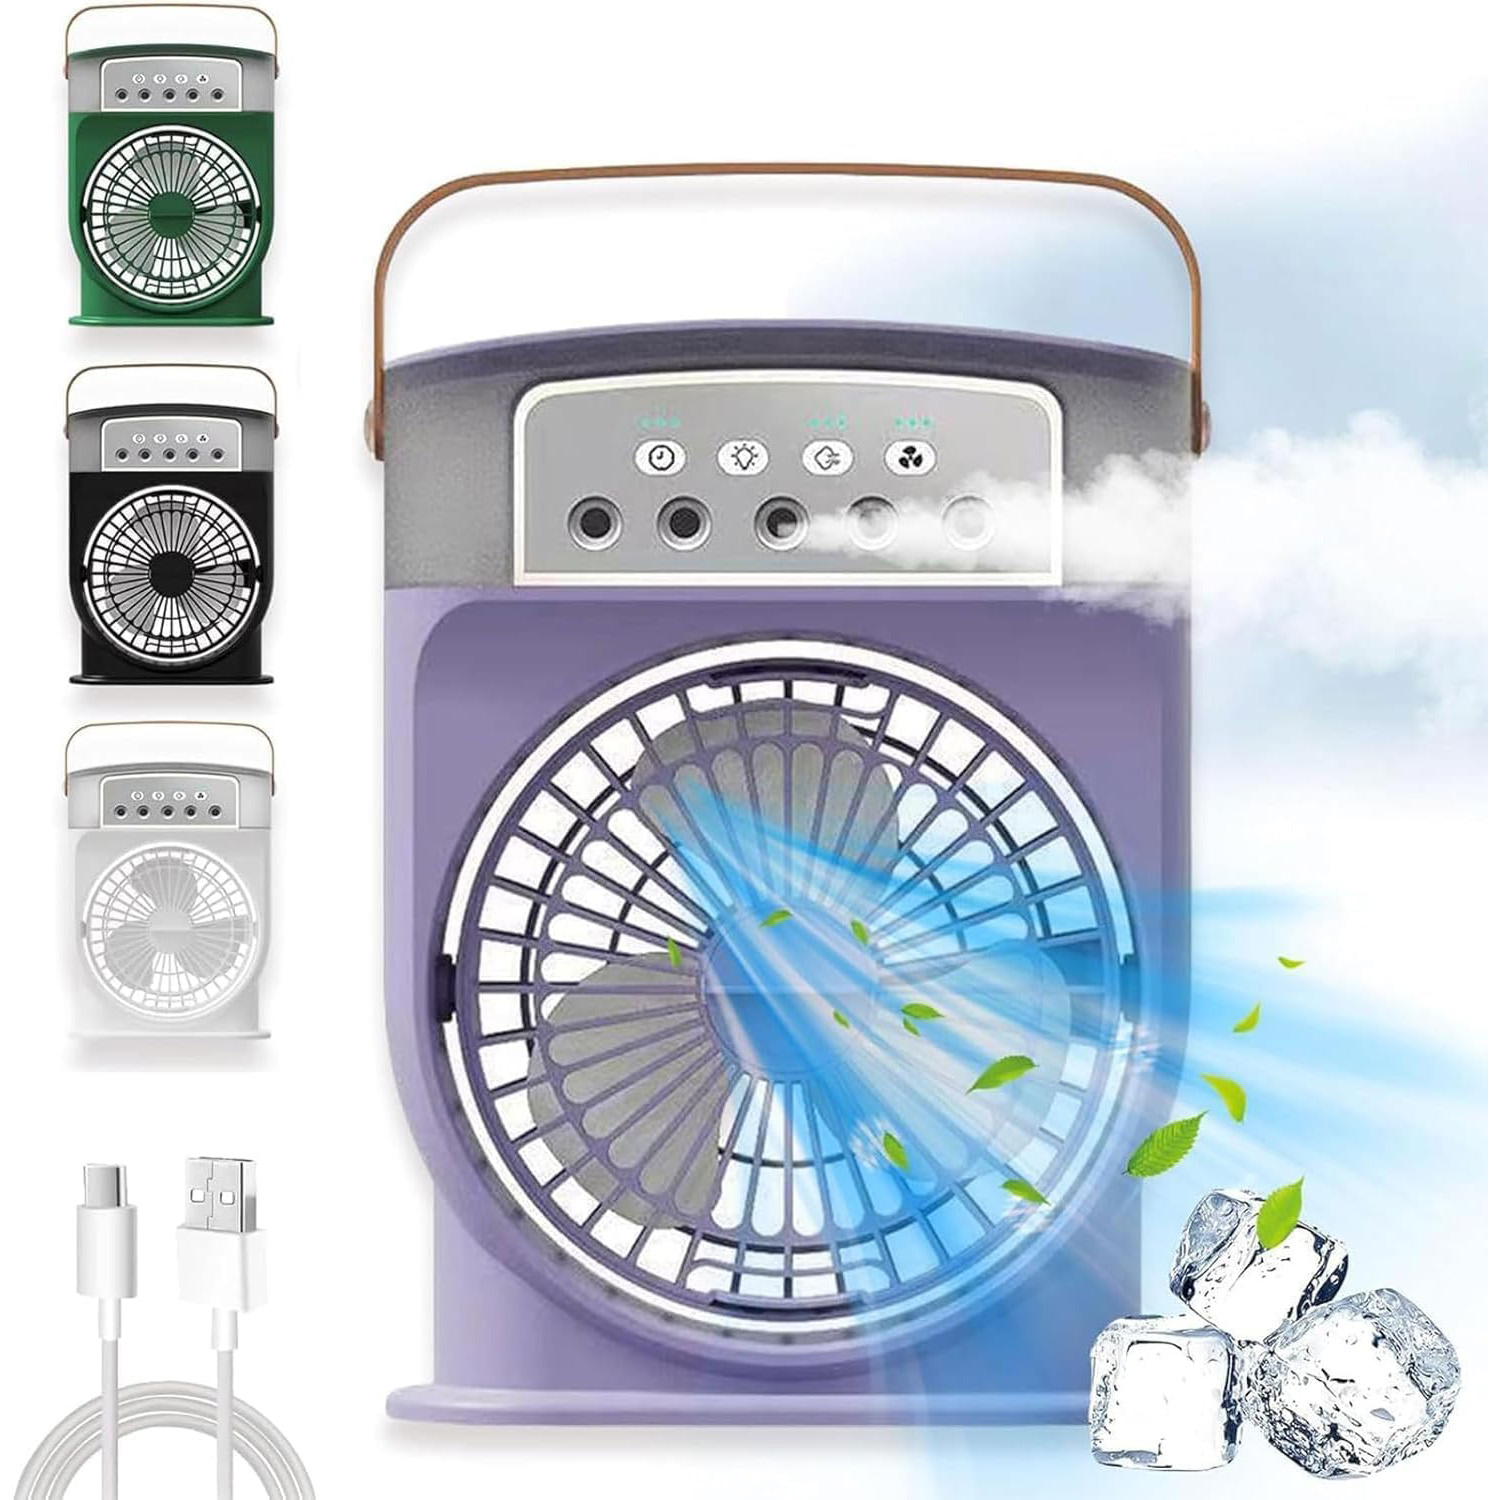 [Copy]3 in 1 Air Cooler, save more electricity+FREE Sun Protection Film Glass Film